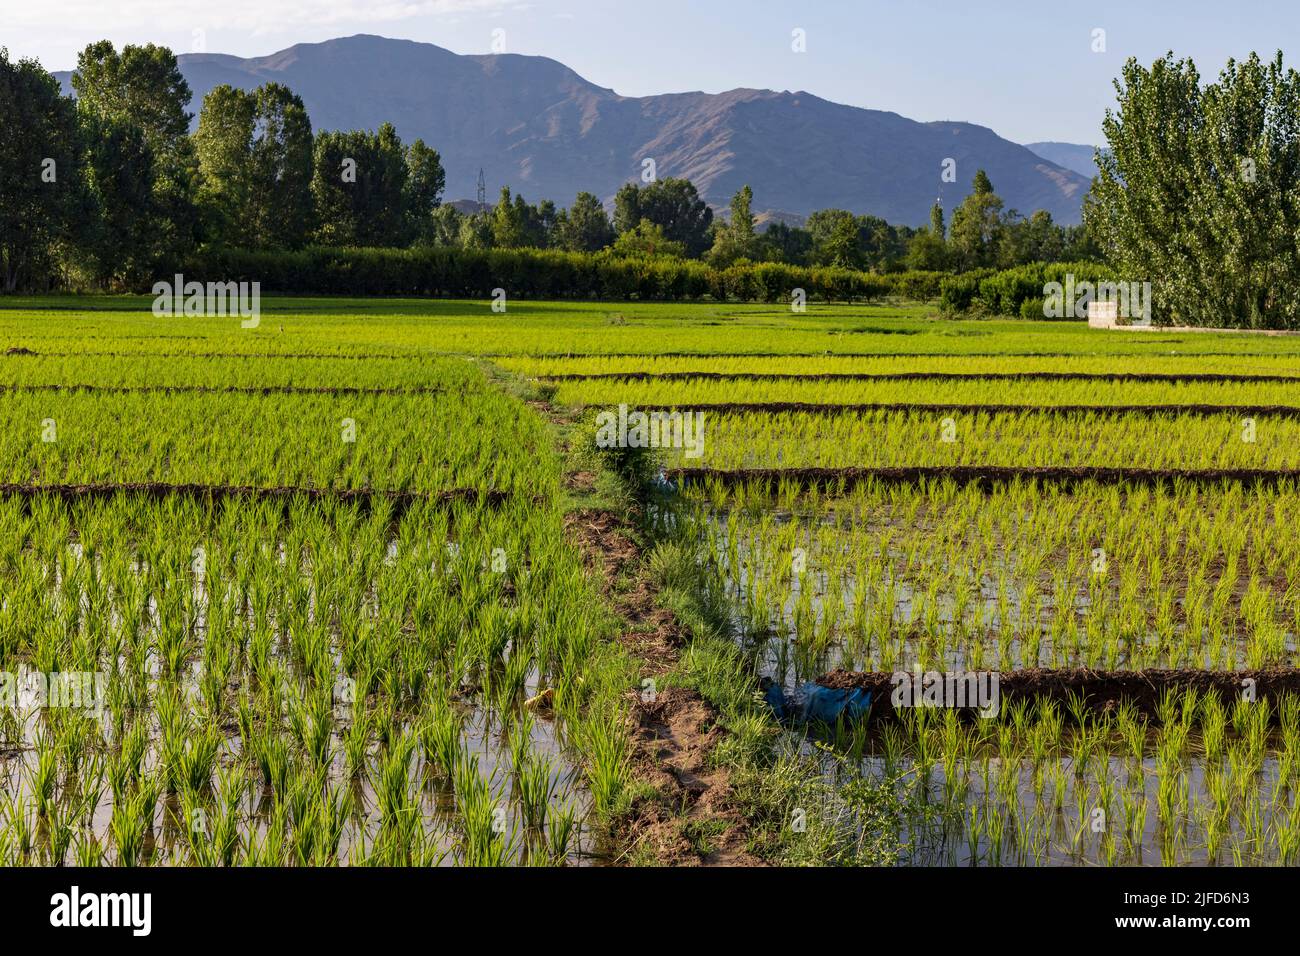 Rice are growing in the paddy field or Rice field Stock Photo